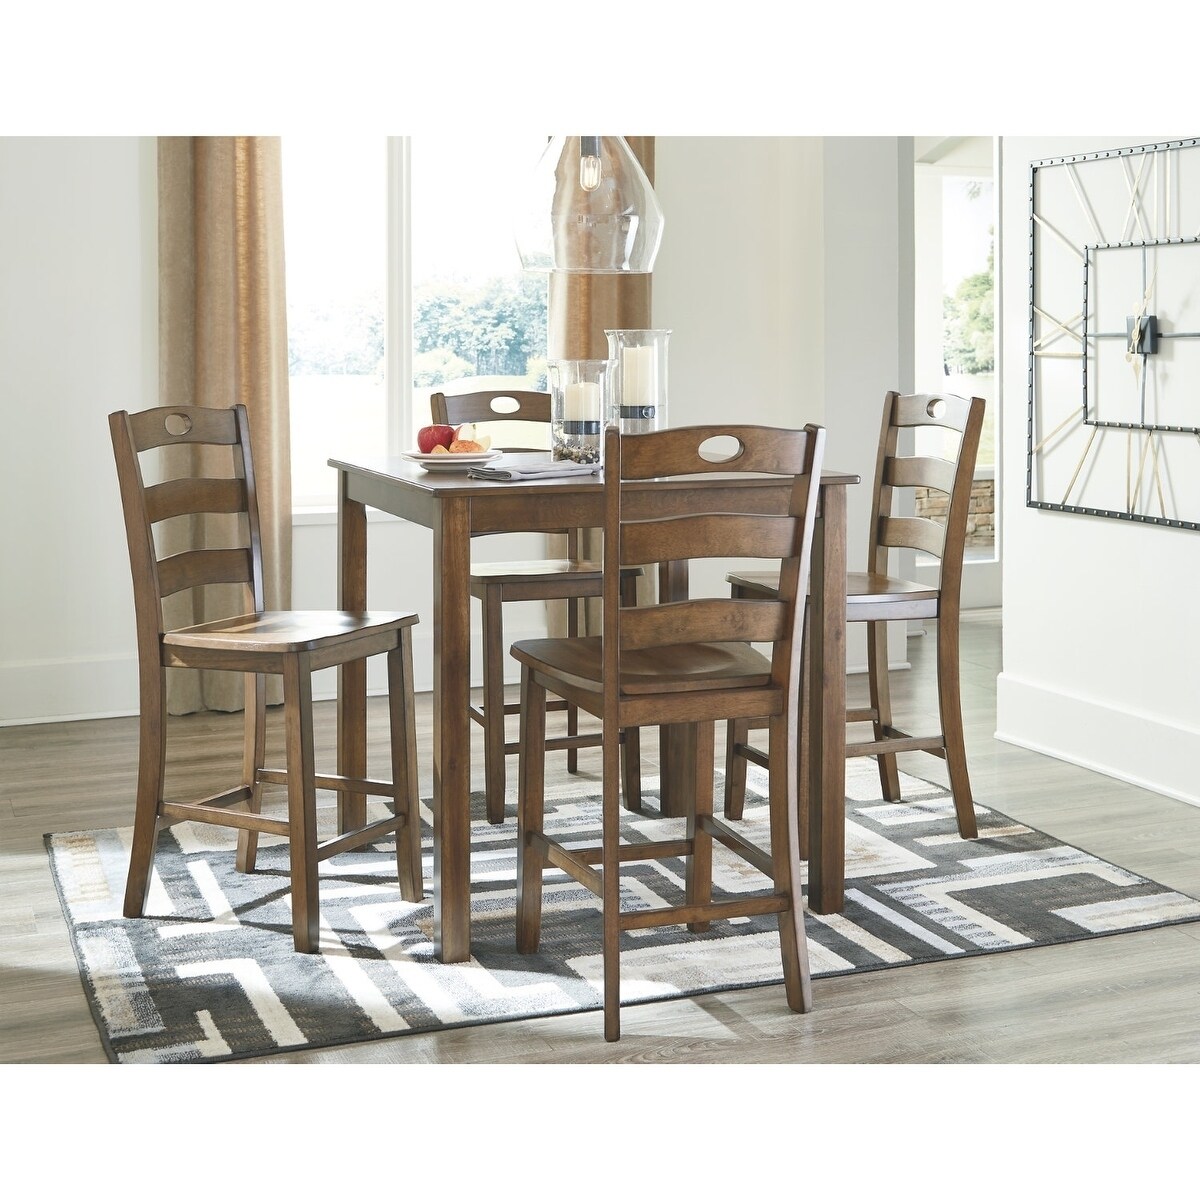 Counter Height Dining Chairs Set Of 4 - 5 Piece Counter Height Dining